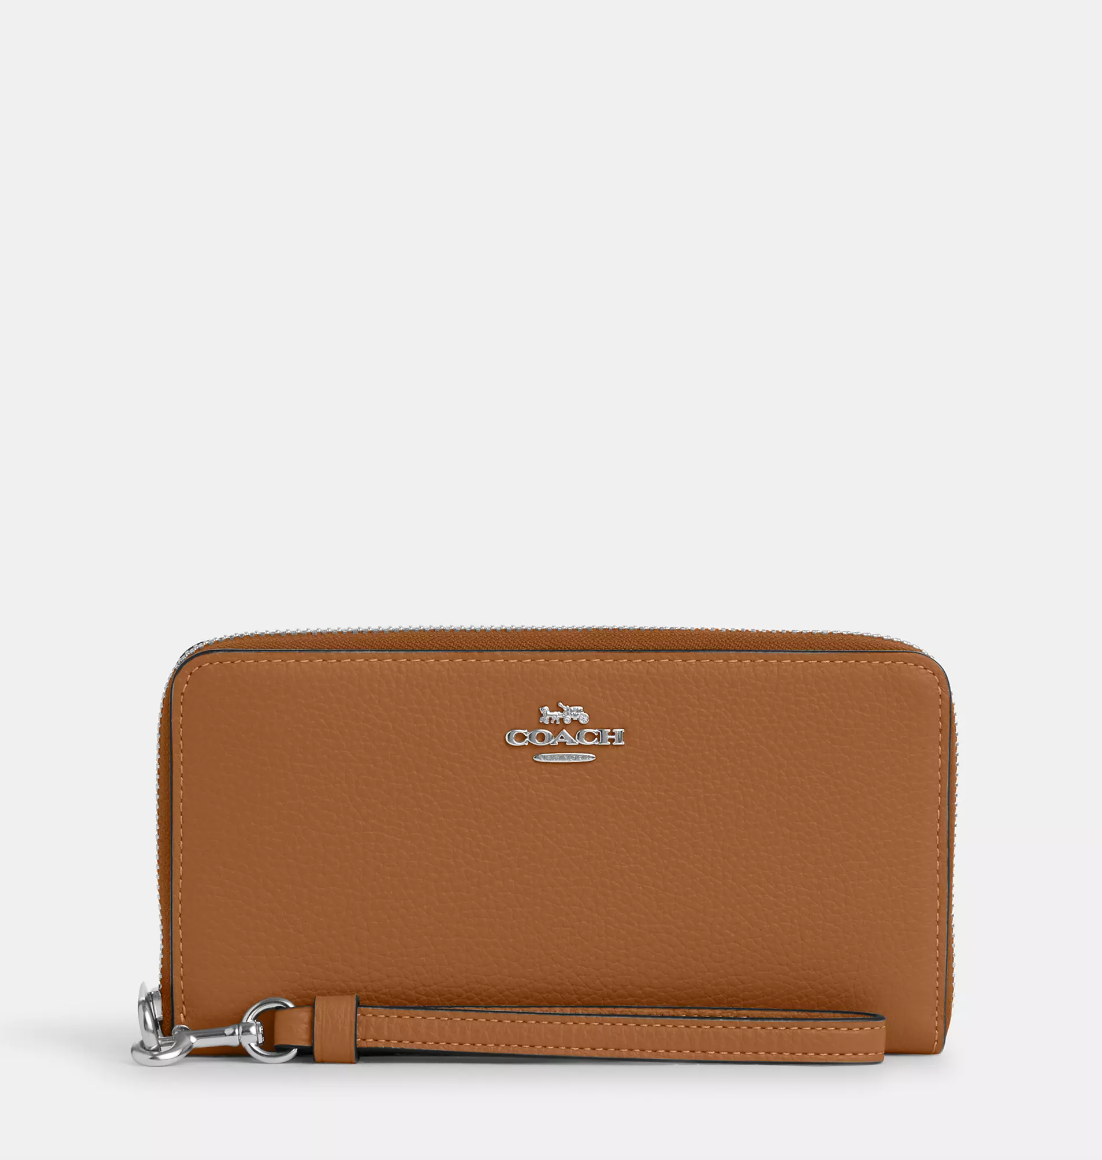 Coach Long Zip Around Wallet In Leather Light Saddle (Pre-Order)